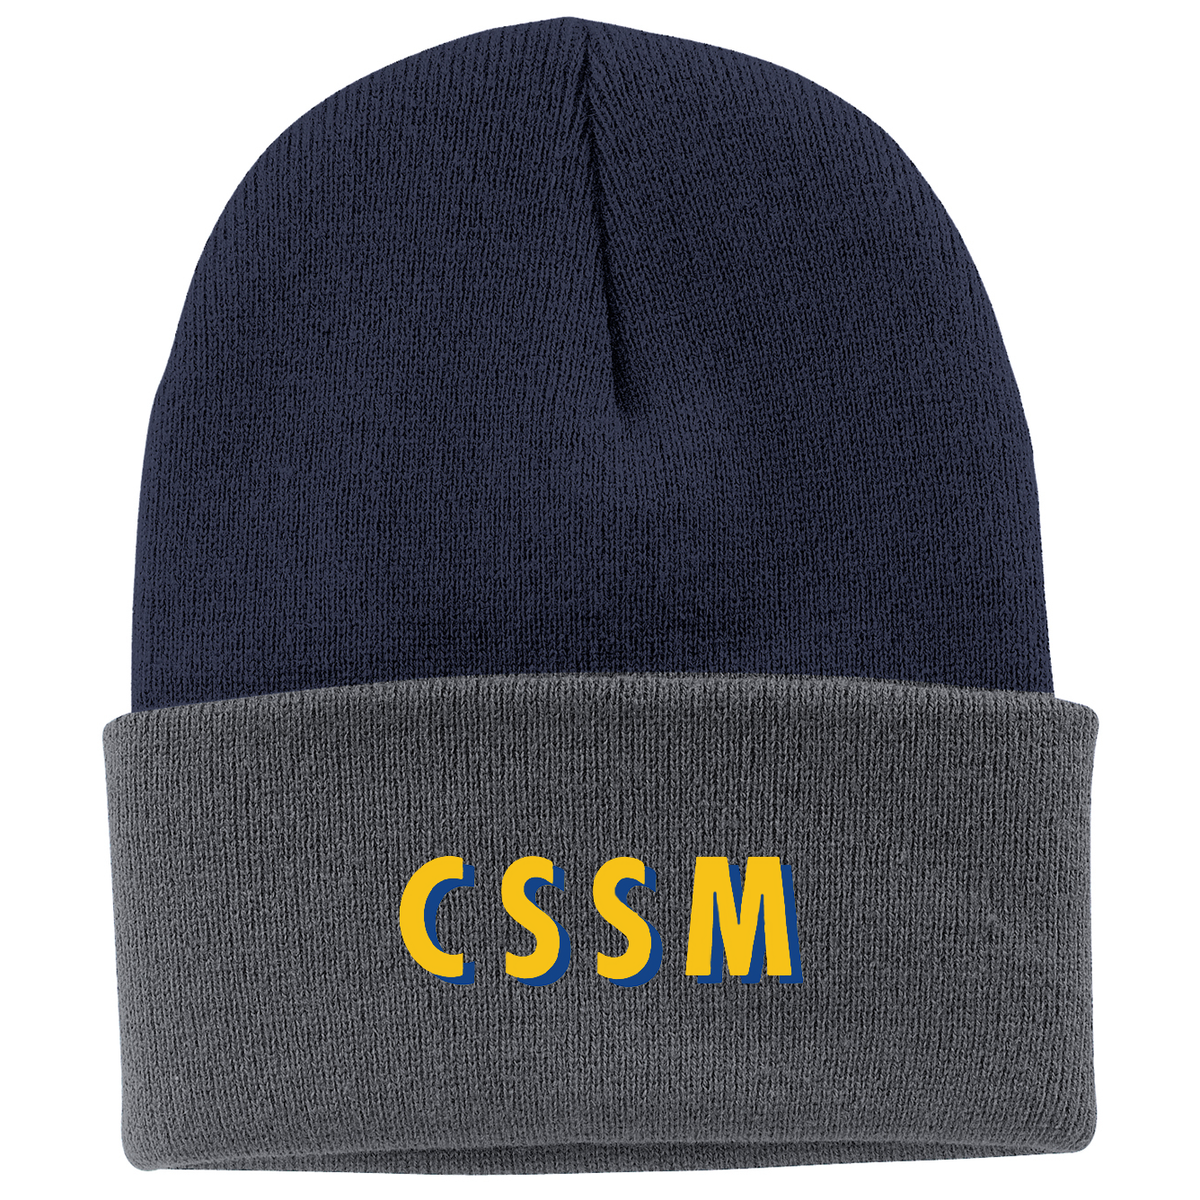 Cleveland School of Science and Medicine Knit Beanie